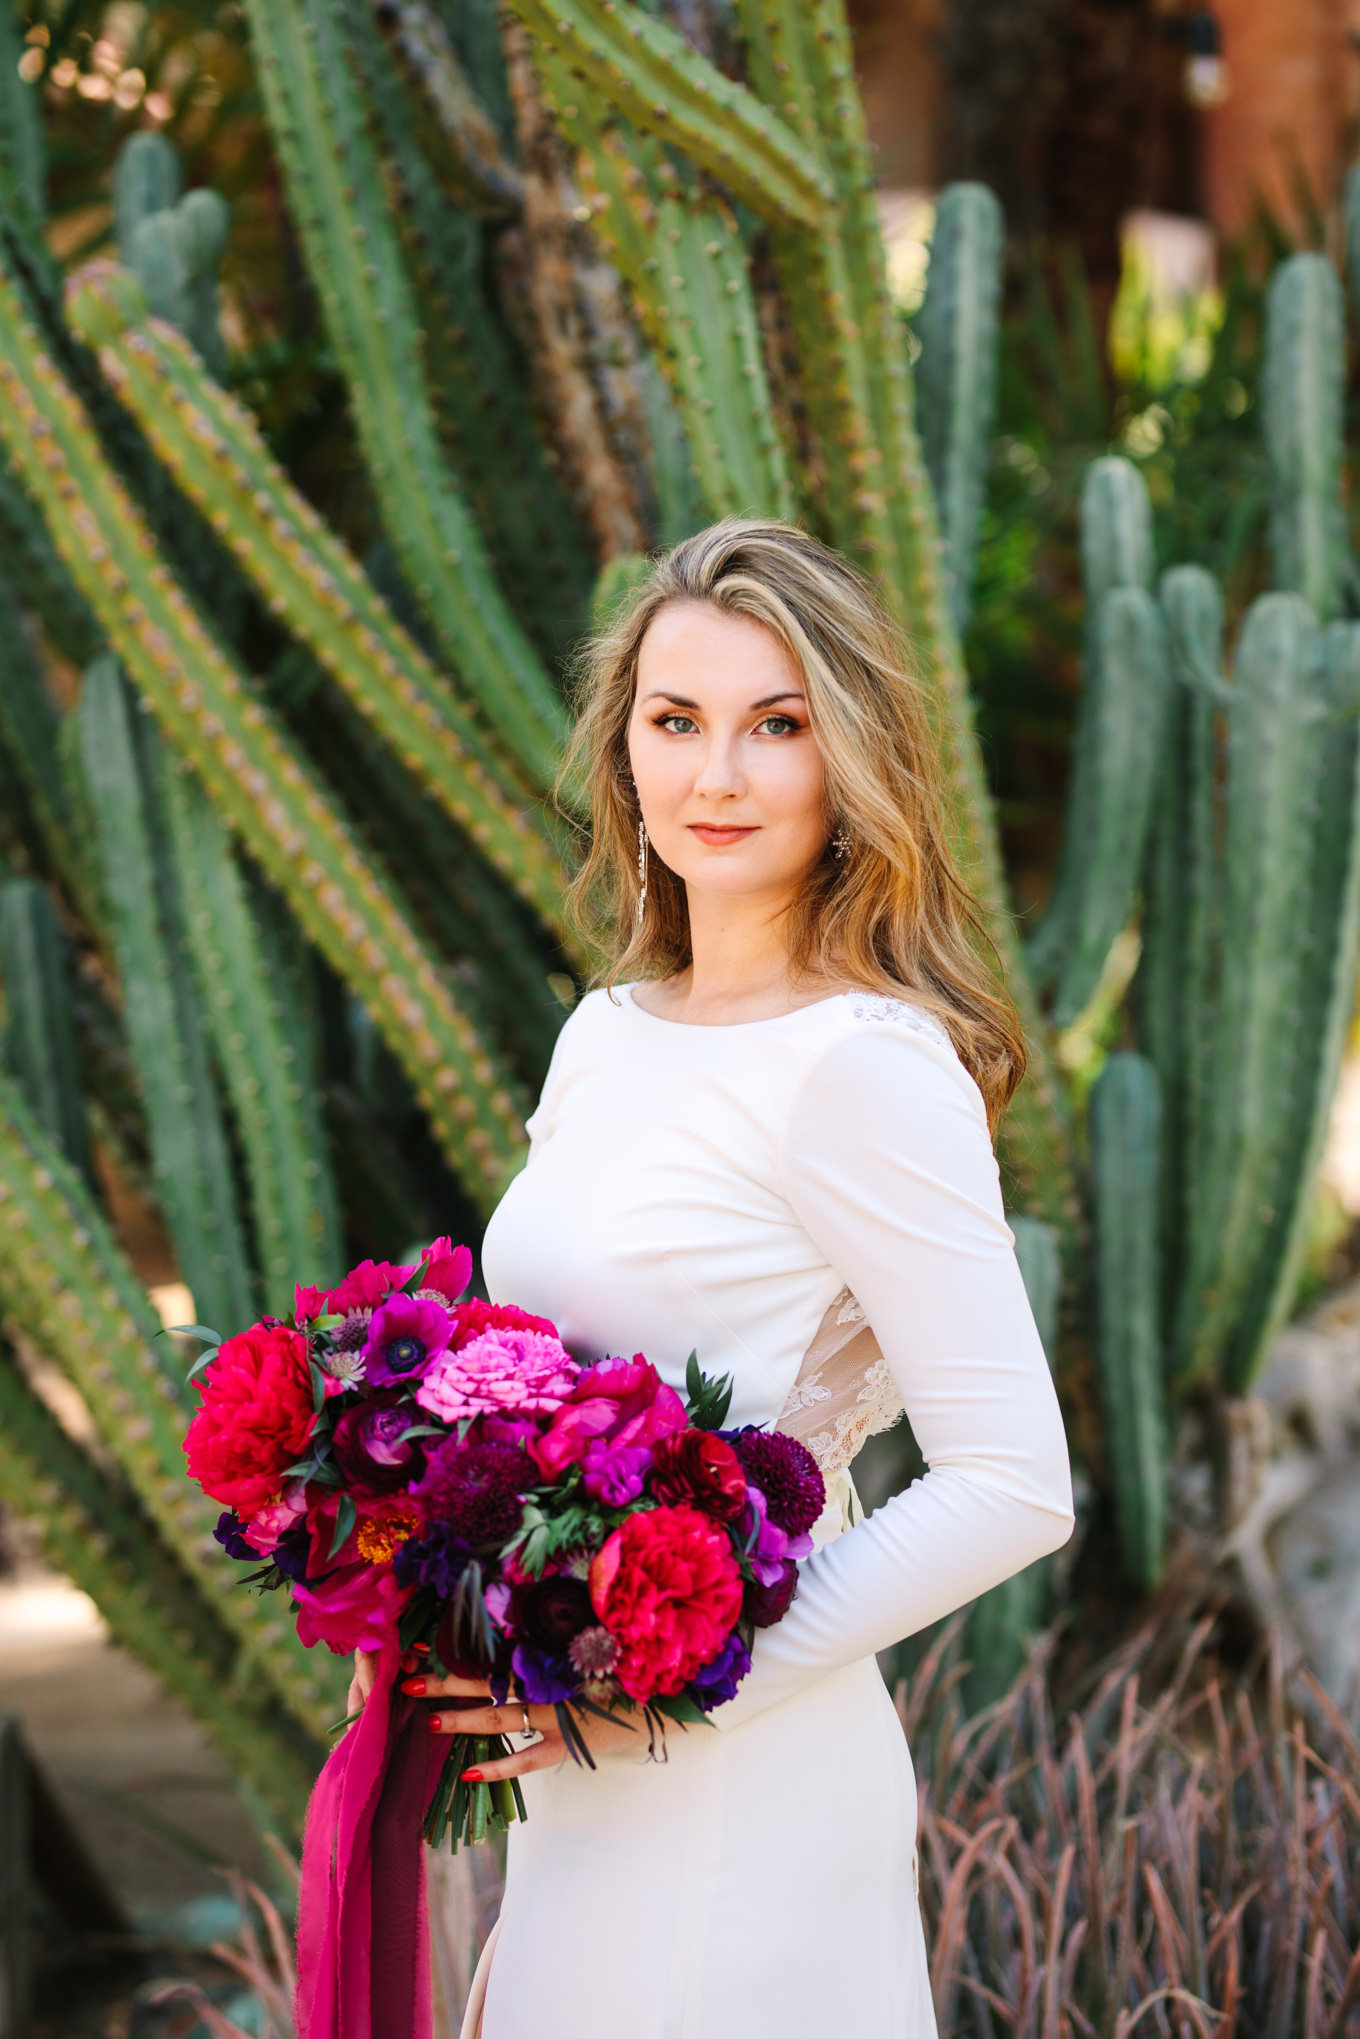 Bridal portrait at Moorten Botanical Garden | Colorful jewel tone Palm Springs elopement | Fresh and colorful photography for fun-loving couples in Southern California | #colorfulelopement #palmspringselopement #elopementphotography #palmspringswedding Source: Mary Costa Photography | Los Angeles